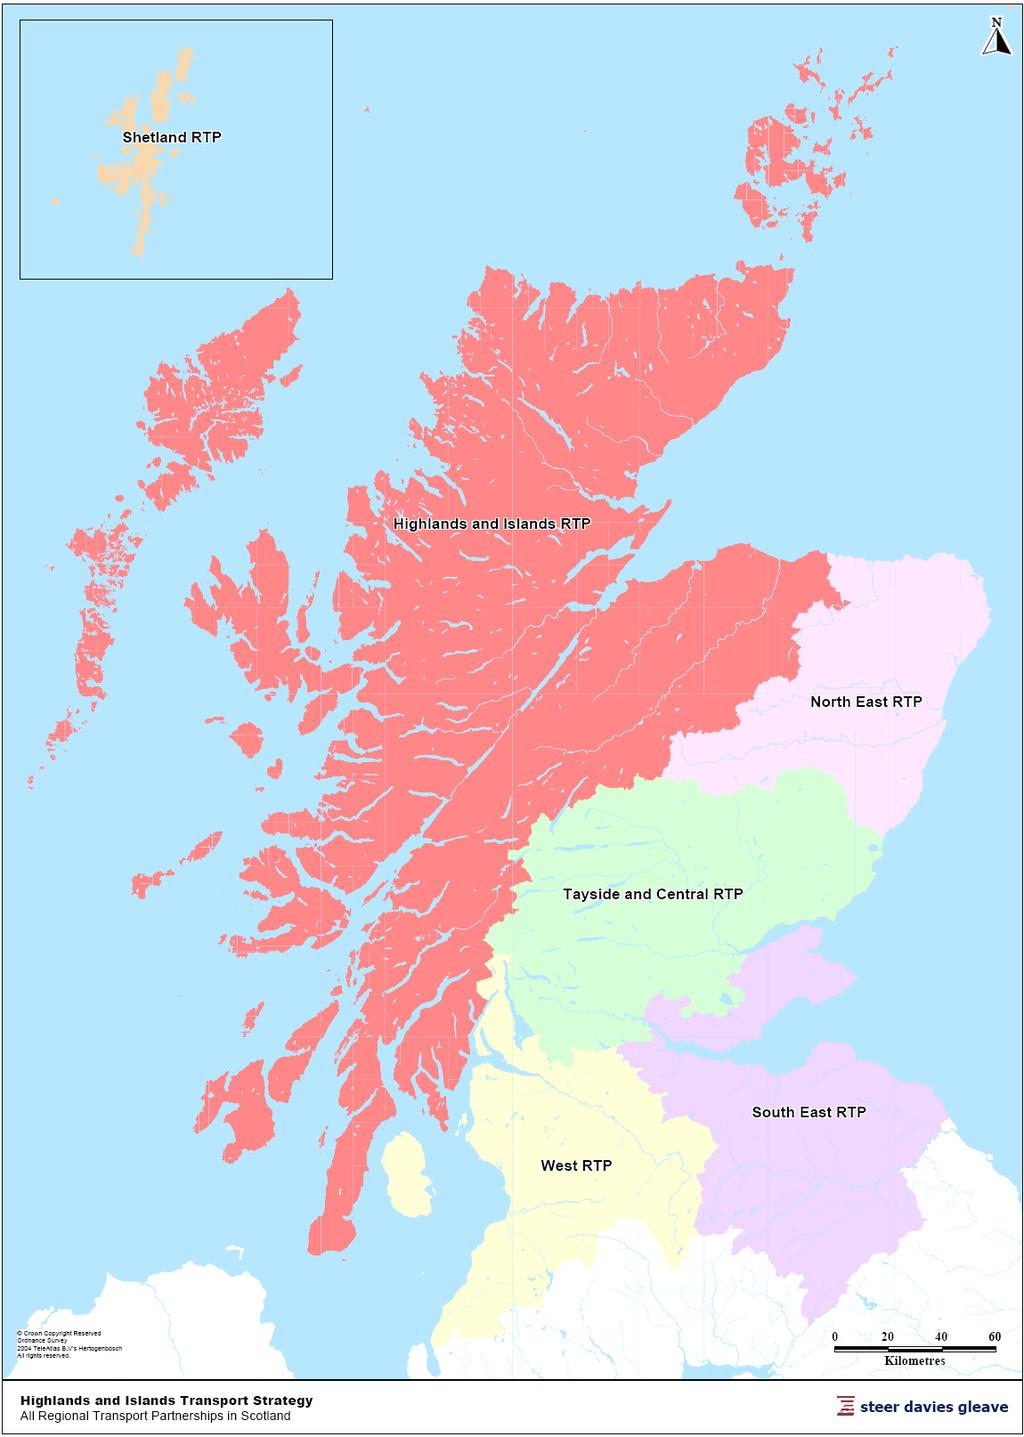 FIGURE 1 MAP OF THE HIGHLANDS AND